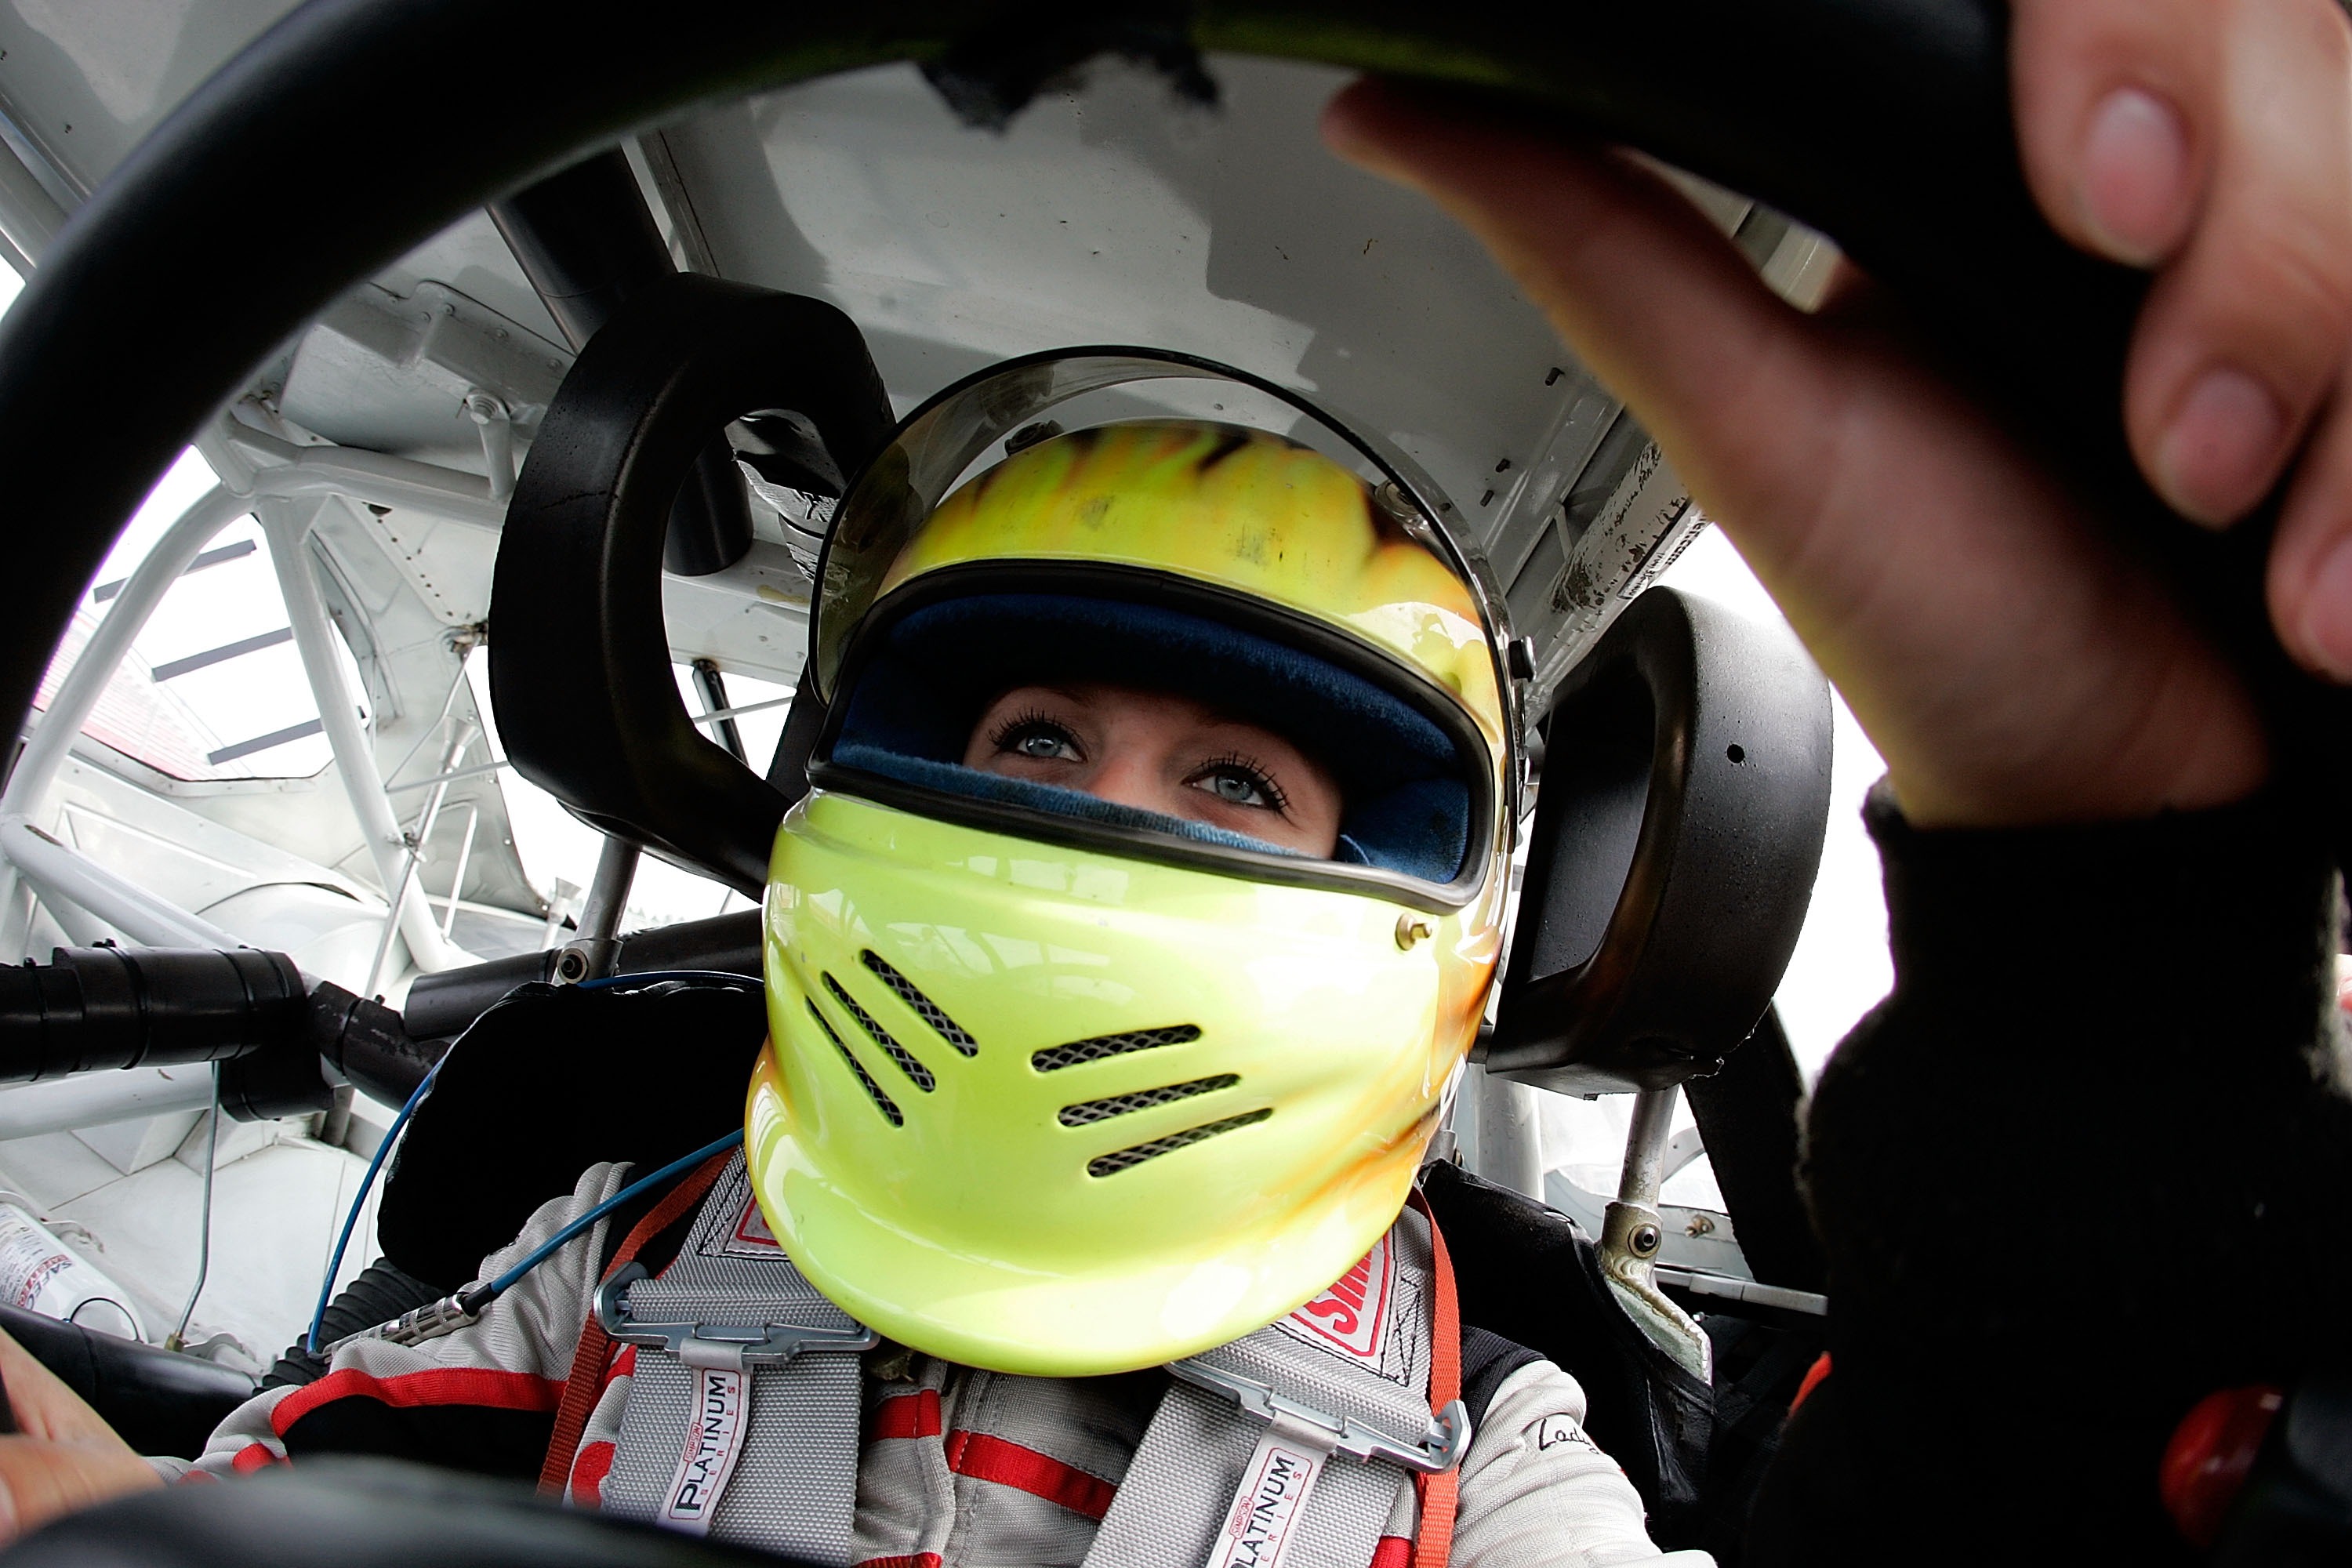 SOUTH BOSTON, VA - OCTOBER 16: Driver Jessica Helberg climbs behind the wheel durig the NASCAR Drive for Diversity combine at South Boston Speedway October 16, 2007 in South Boston, Virginia. (Photo by Grant Halverson/Getty Images for NASCAR)